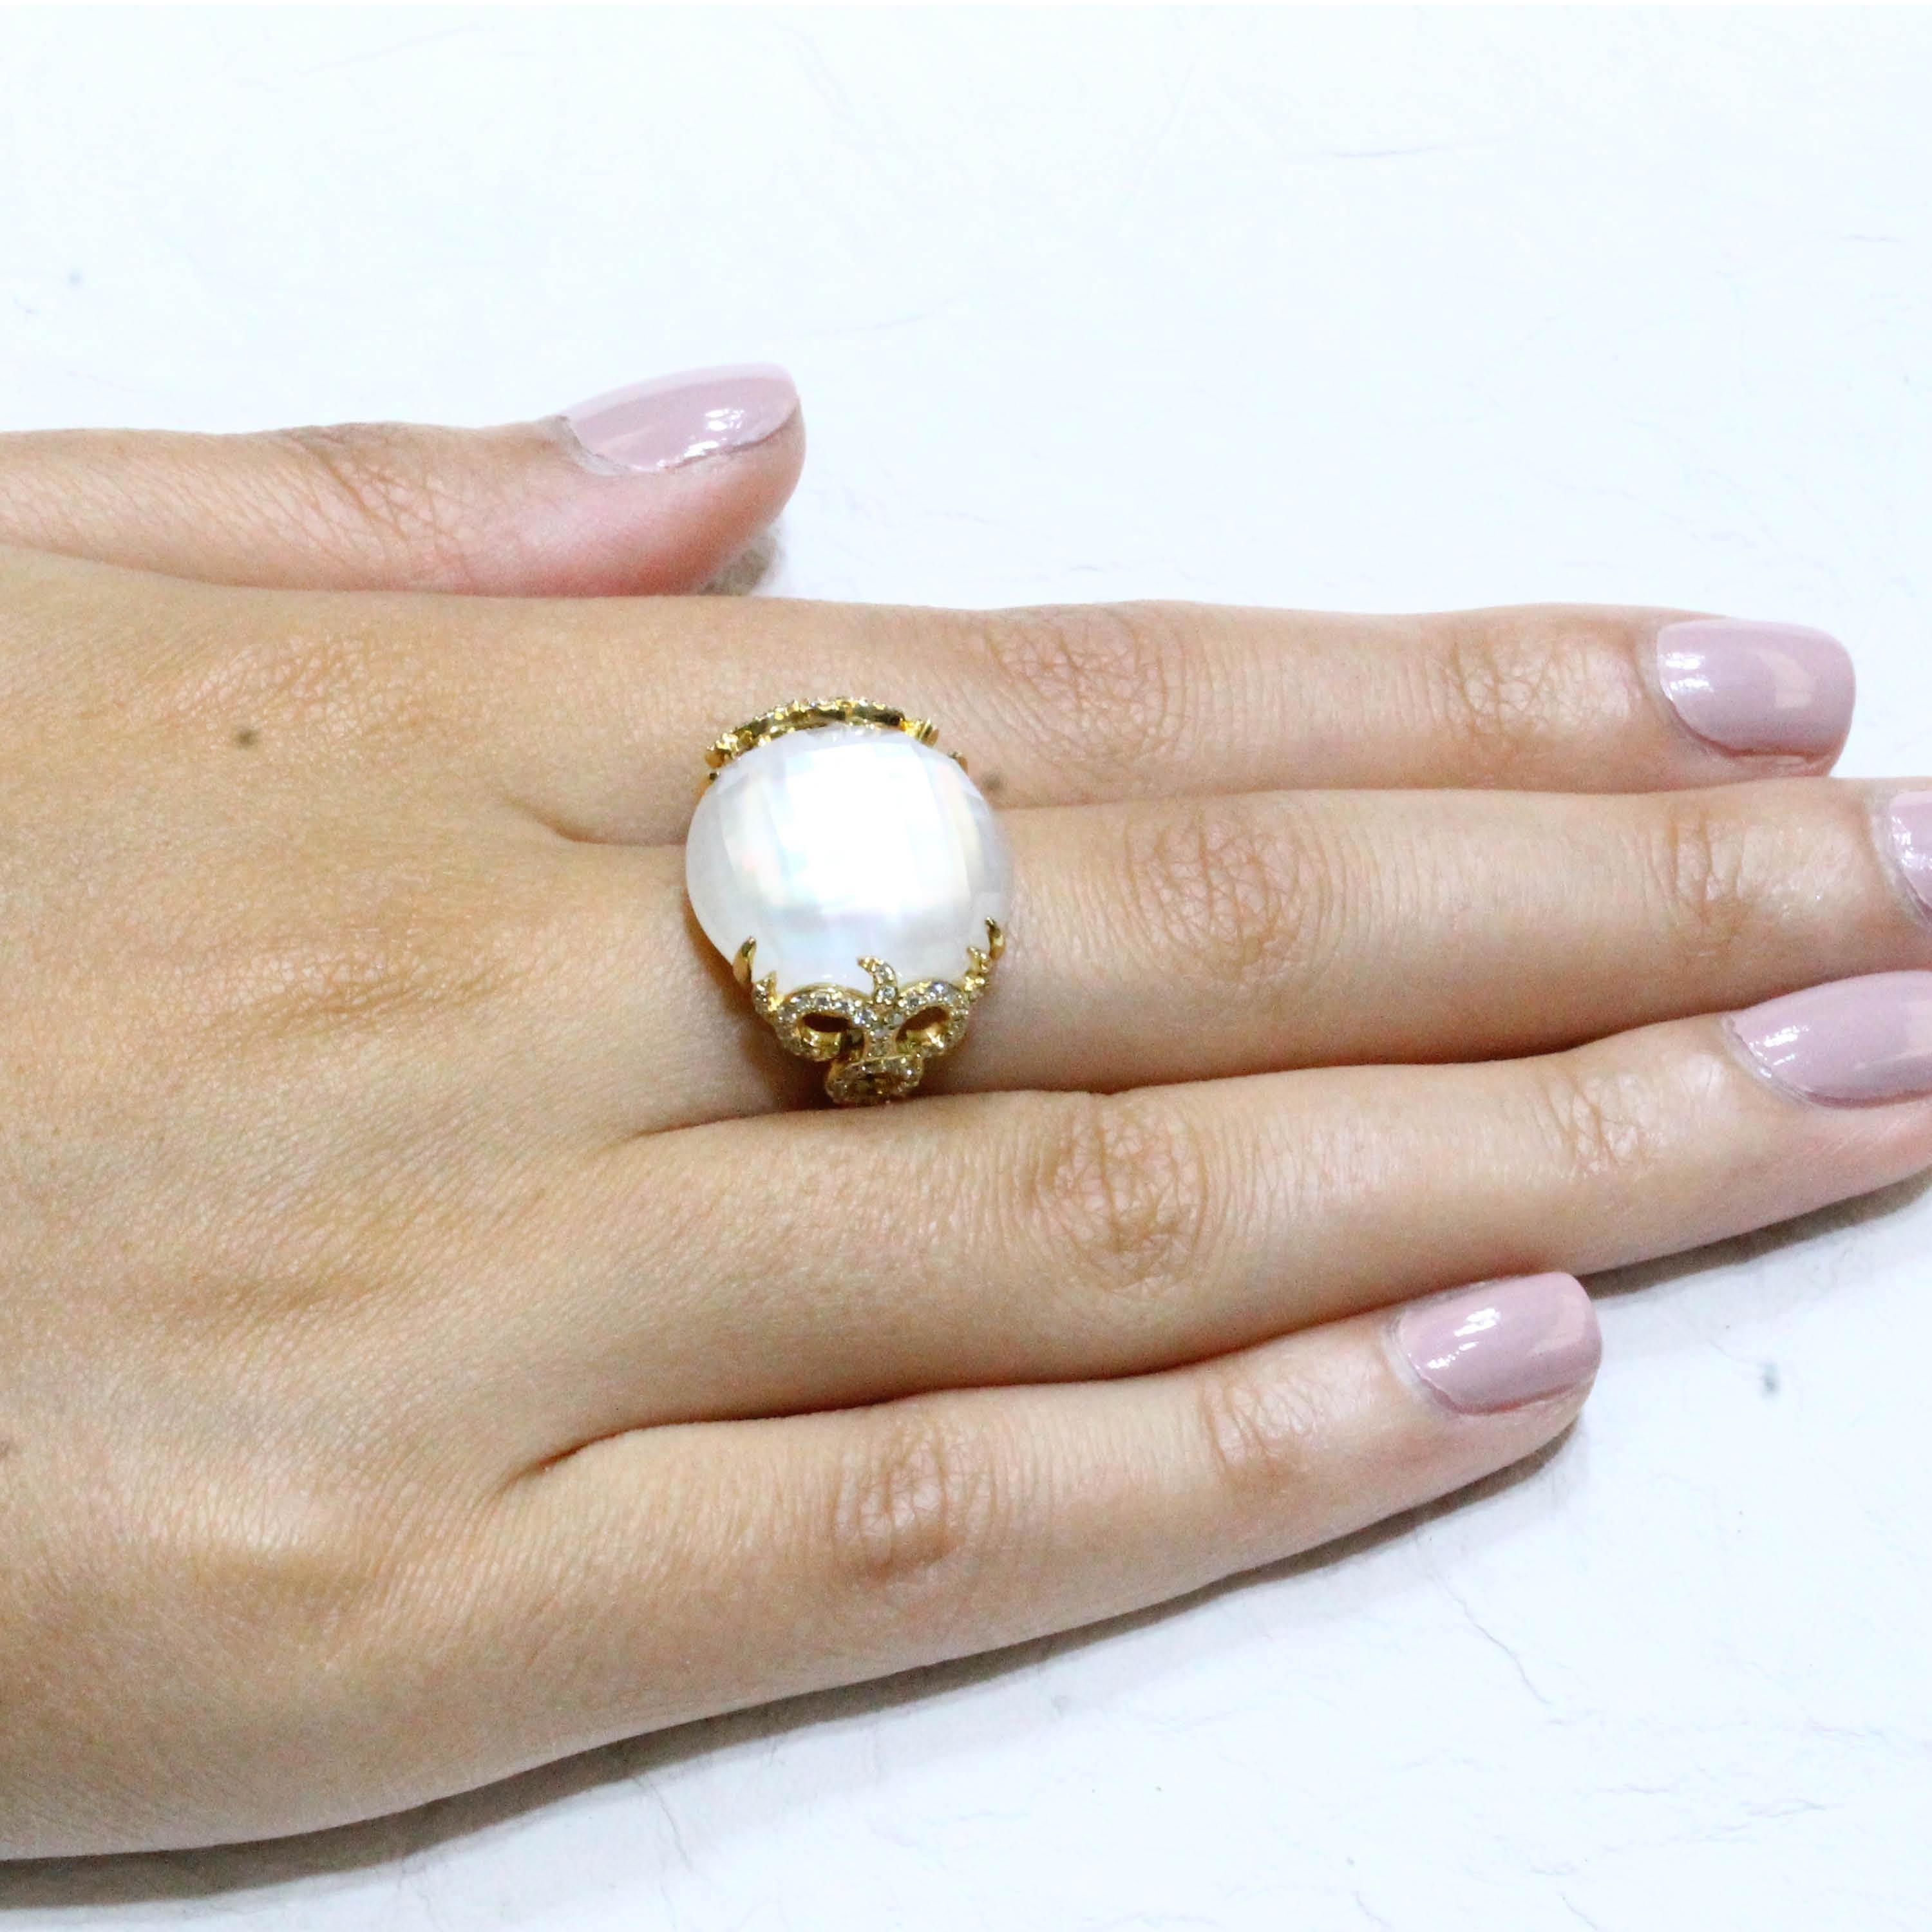 One-of-a-Kind Statement Ring from the White Orchid collection, featuring a 